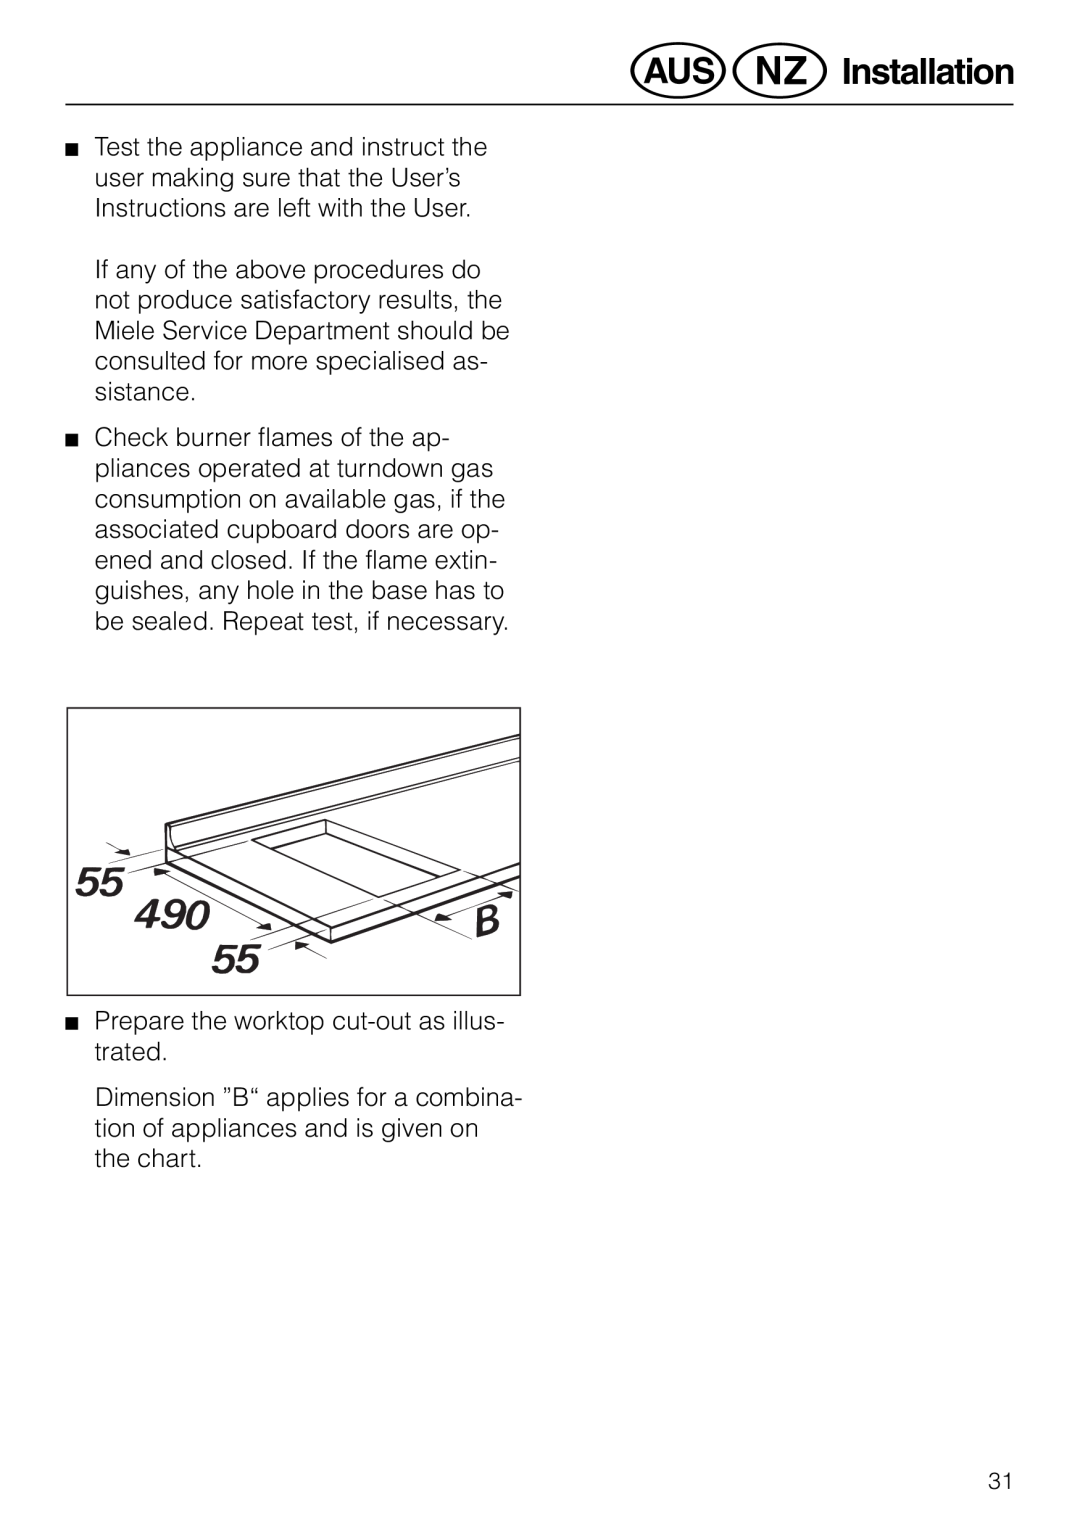 Miele KM 81-2 operating instructions @äInstallation, Prepare the worktop cut-outas illus- trated 